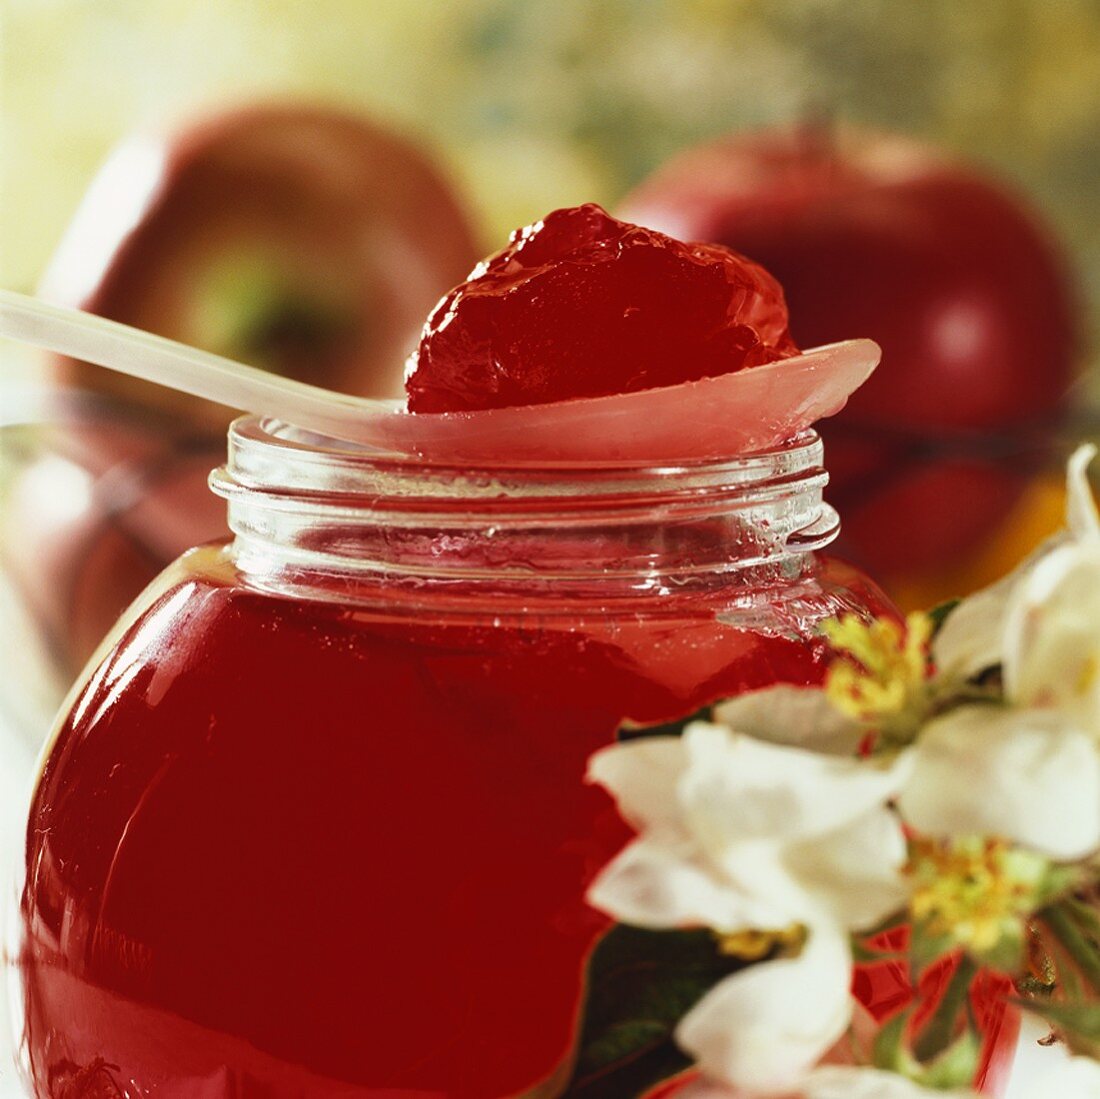 Apple and redcurrant jelly (close-up)